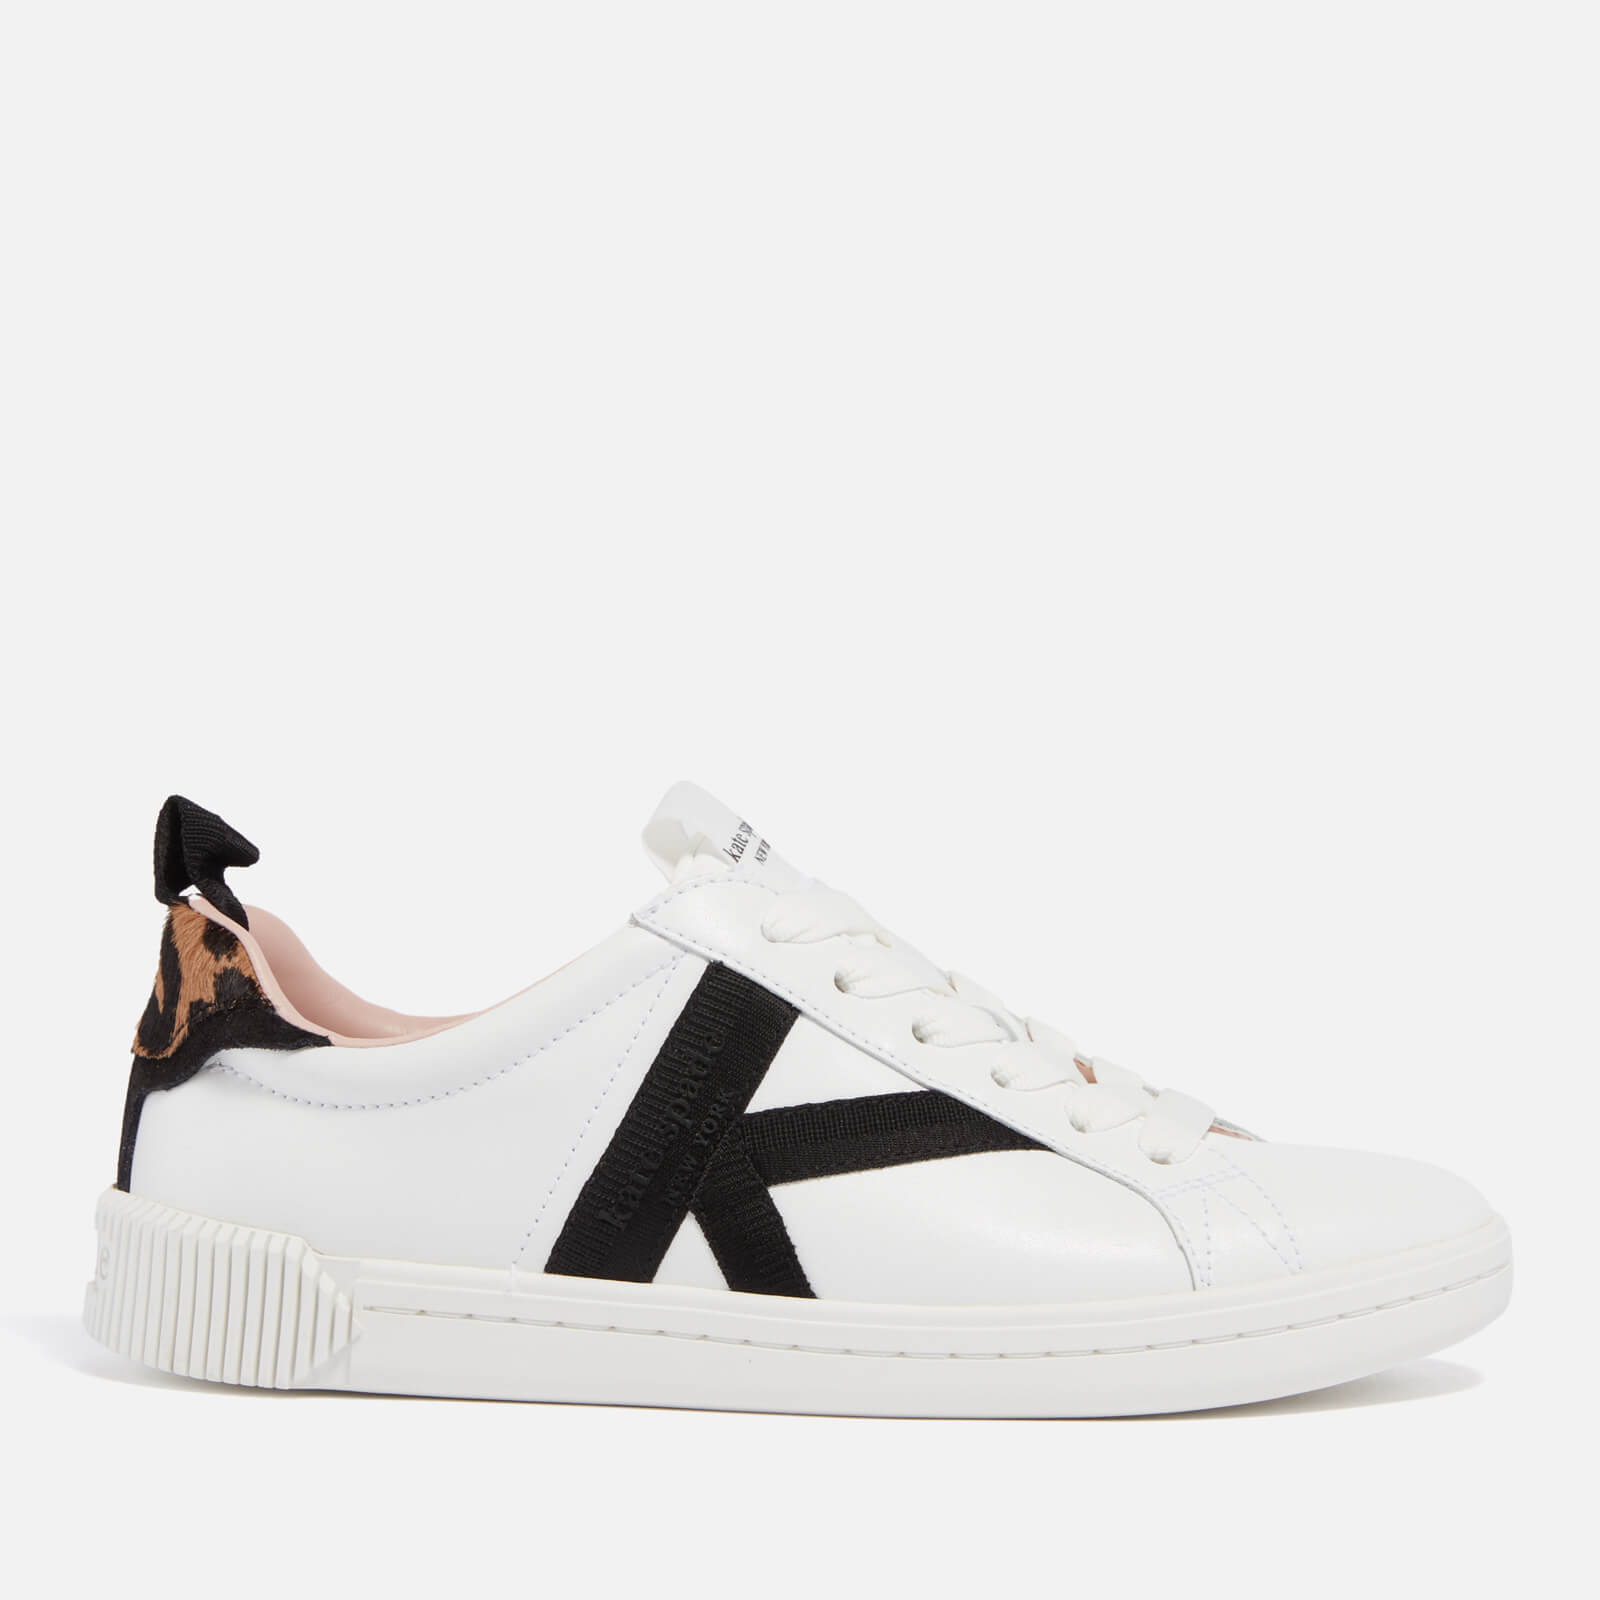 Kate Spade Women’s Signature Leather Trainers